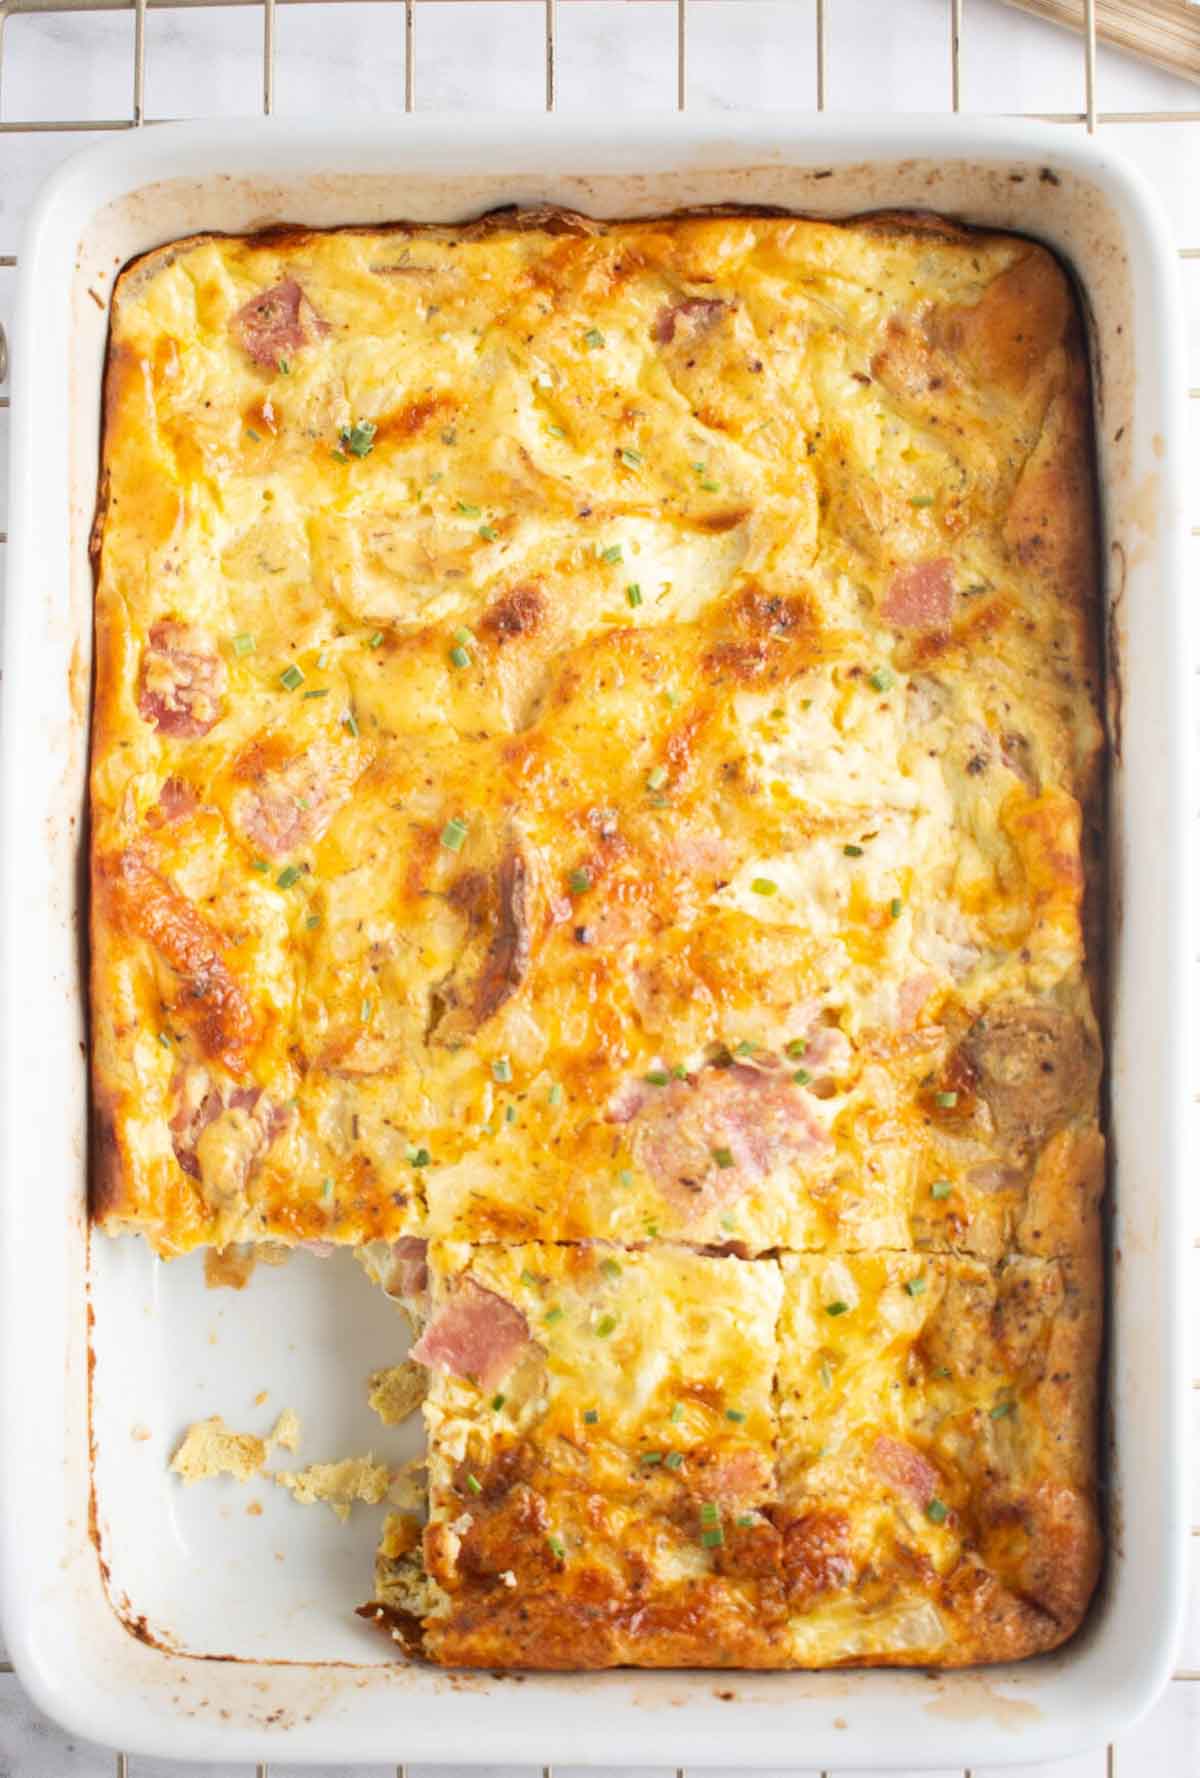 Boxed scalloped potatoes breakfast casserole with one square missing.